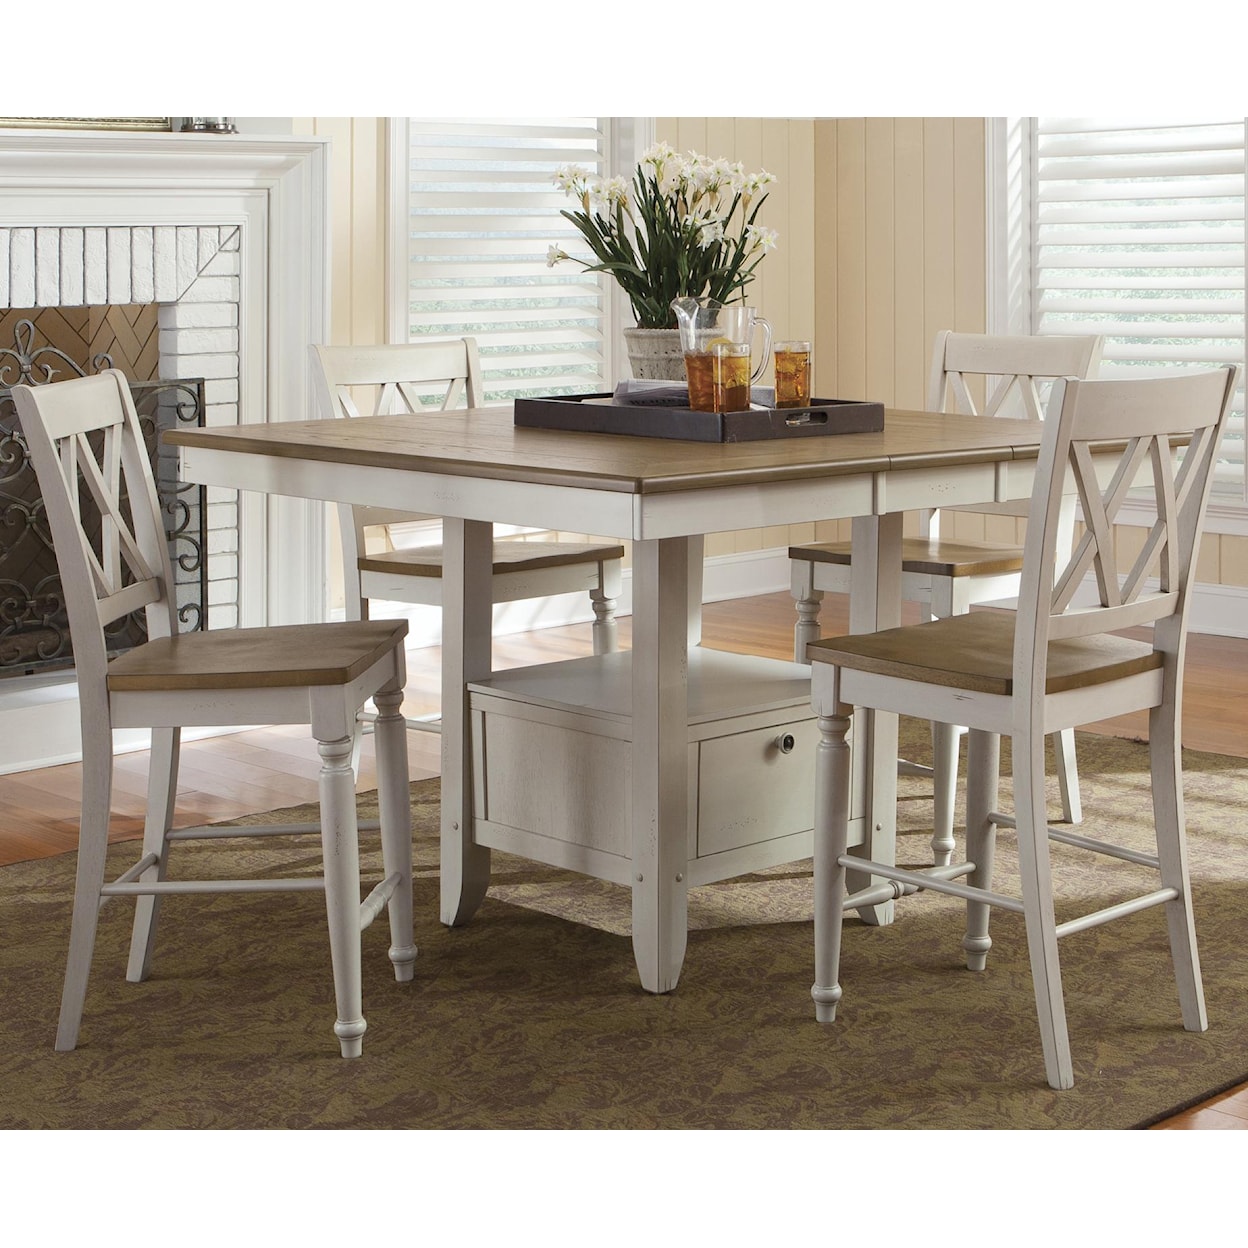 Liberty Furniture Al Fresco 5 Piece Gathering Table and Chairs Set